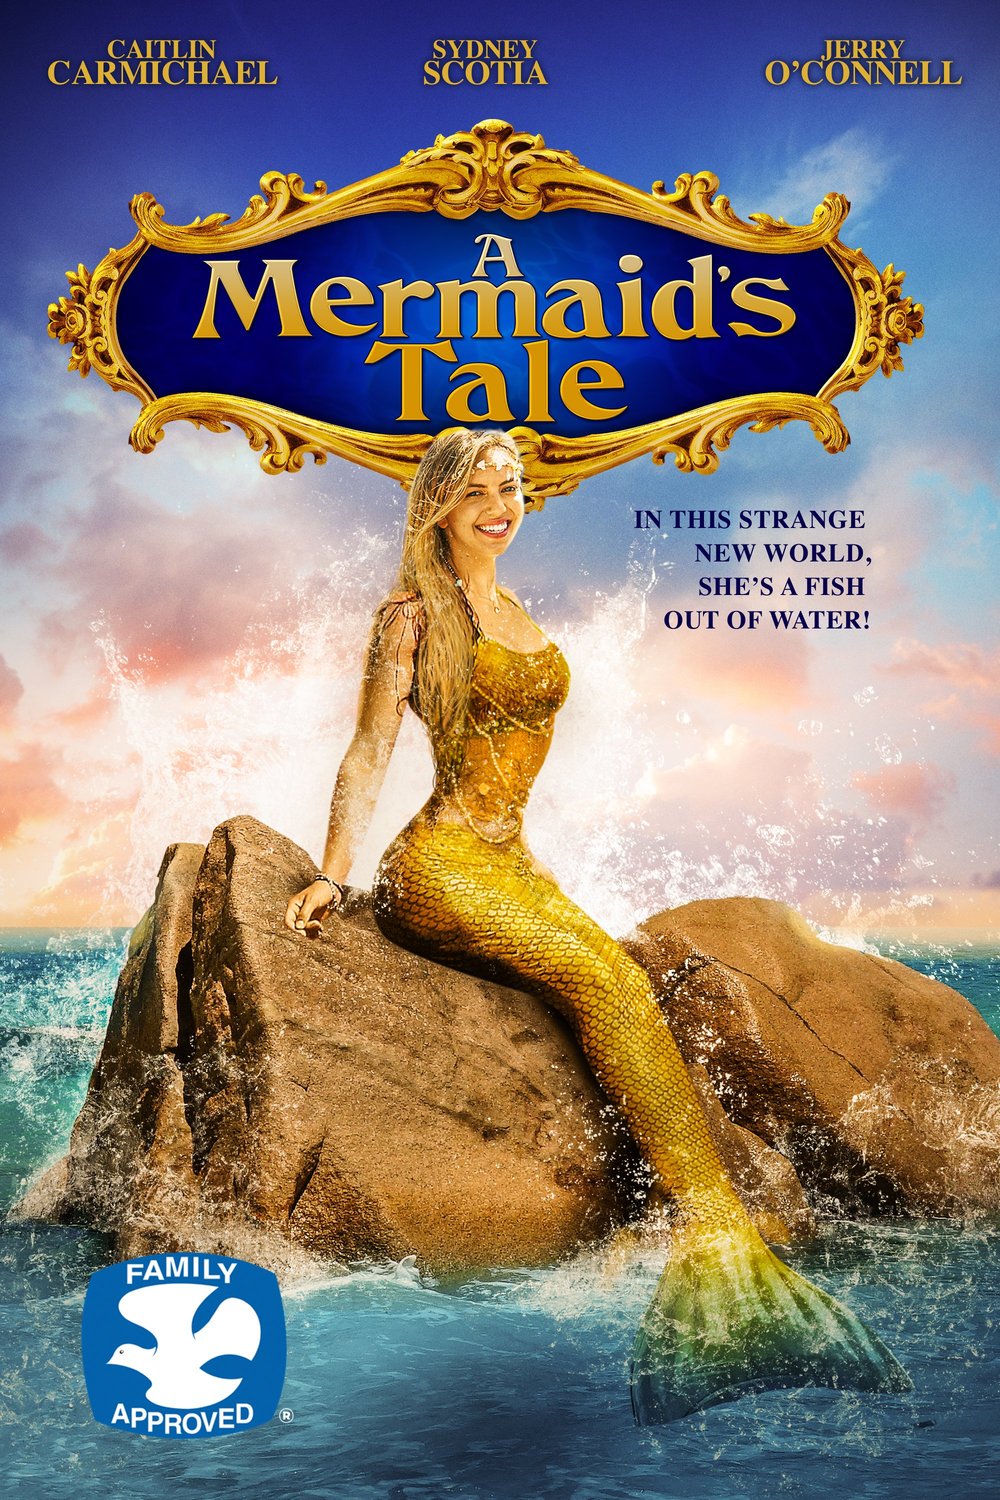 Poster of the movie A Mermaid's Tale